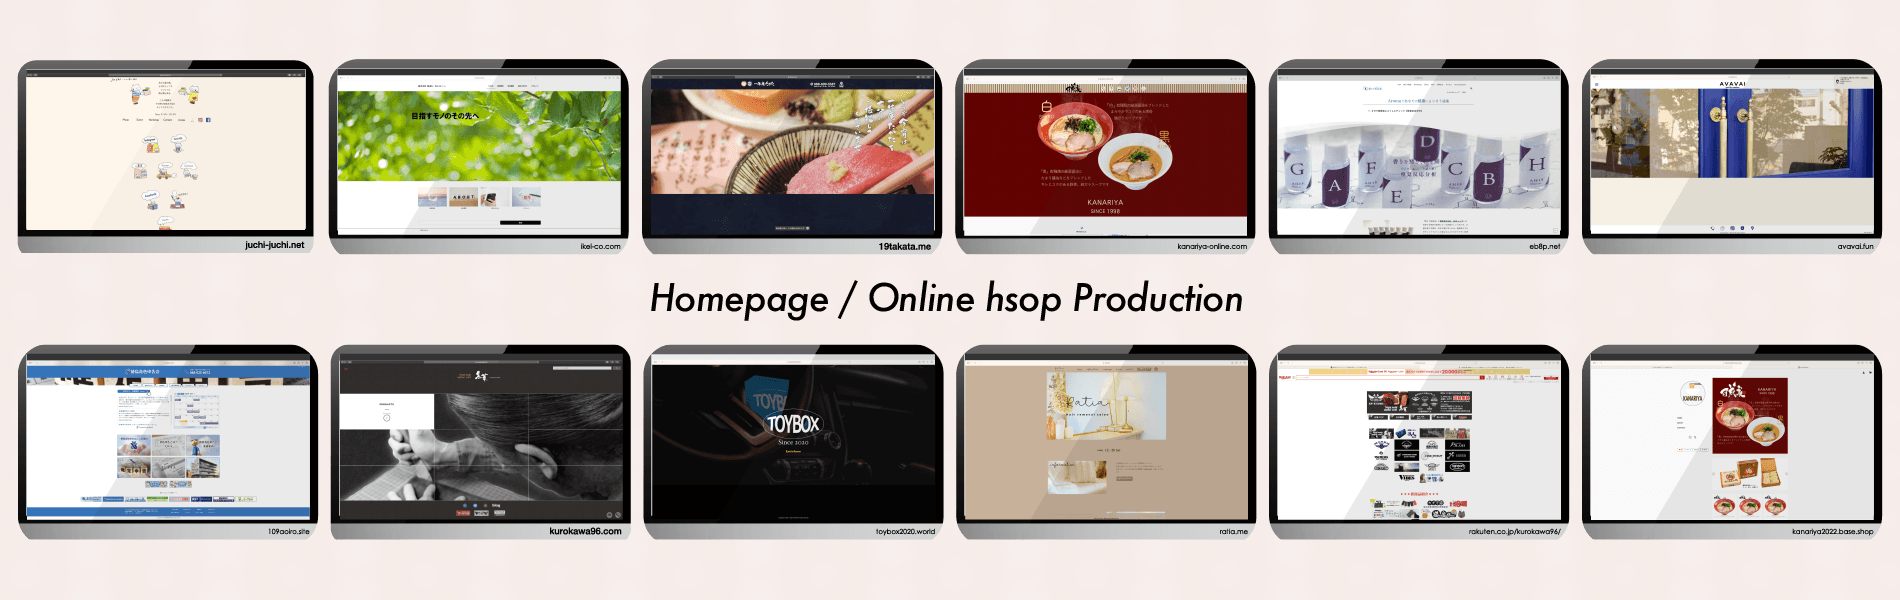 Homepage / Online shop Production